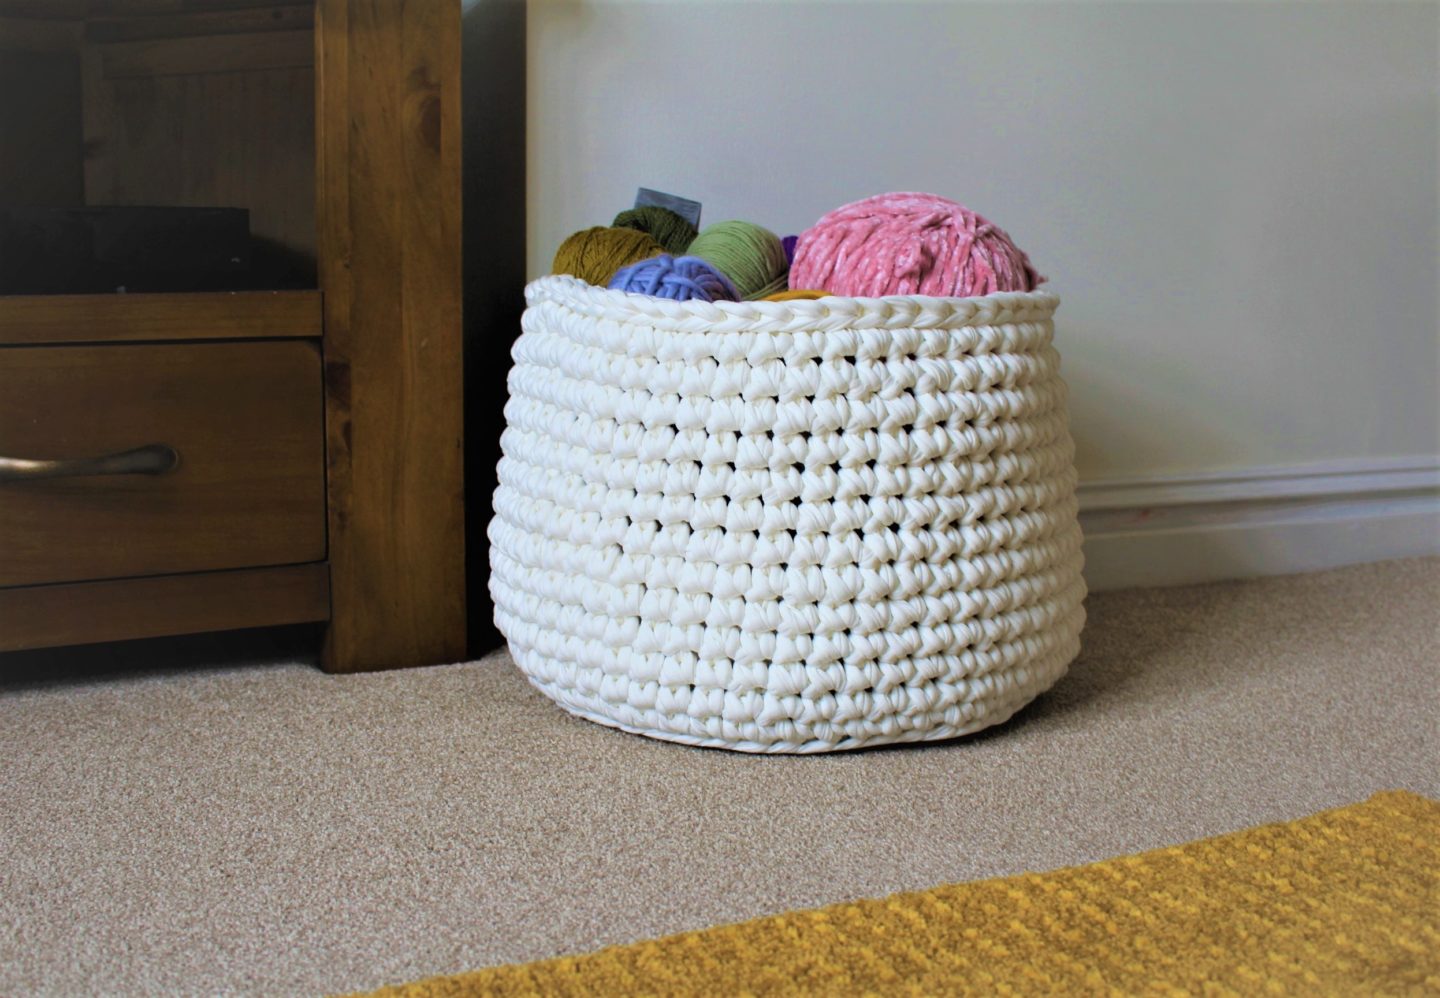 Valentines Day Gift for Her Unique Home Decor Kitchen Table Decor New Home Gift Chunky Cotton Yarn Basket Round Crochet Storage Basket